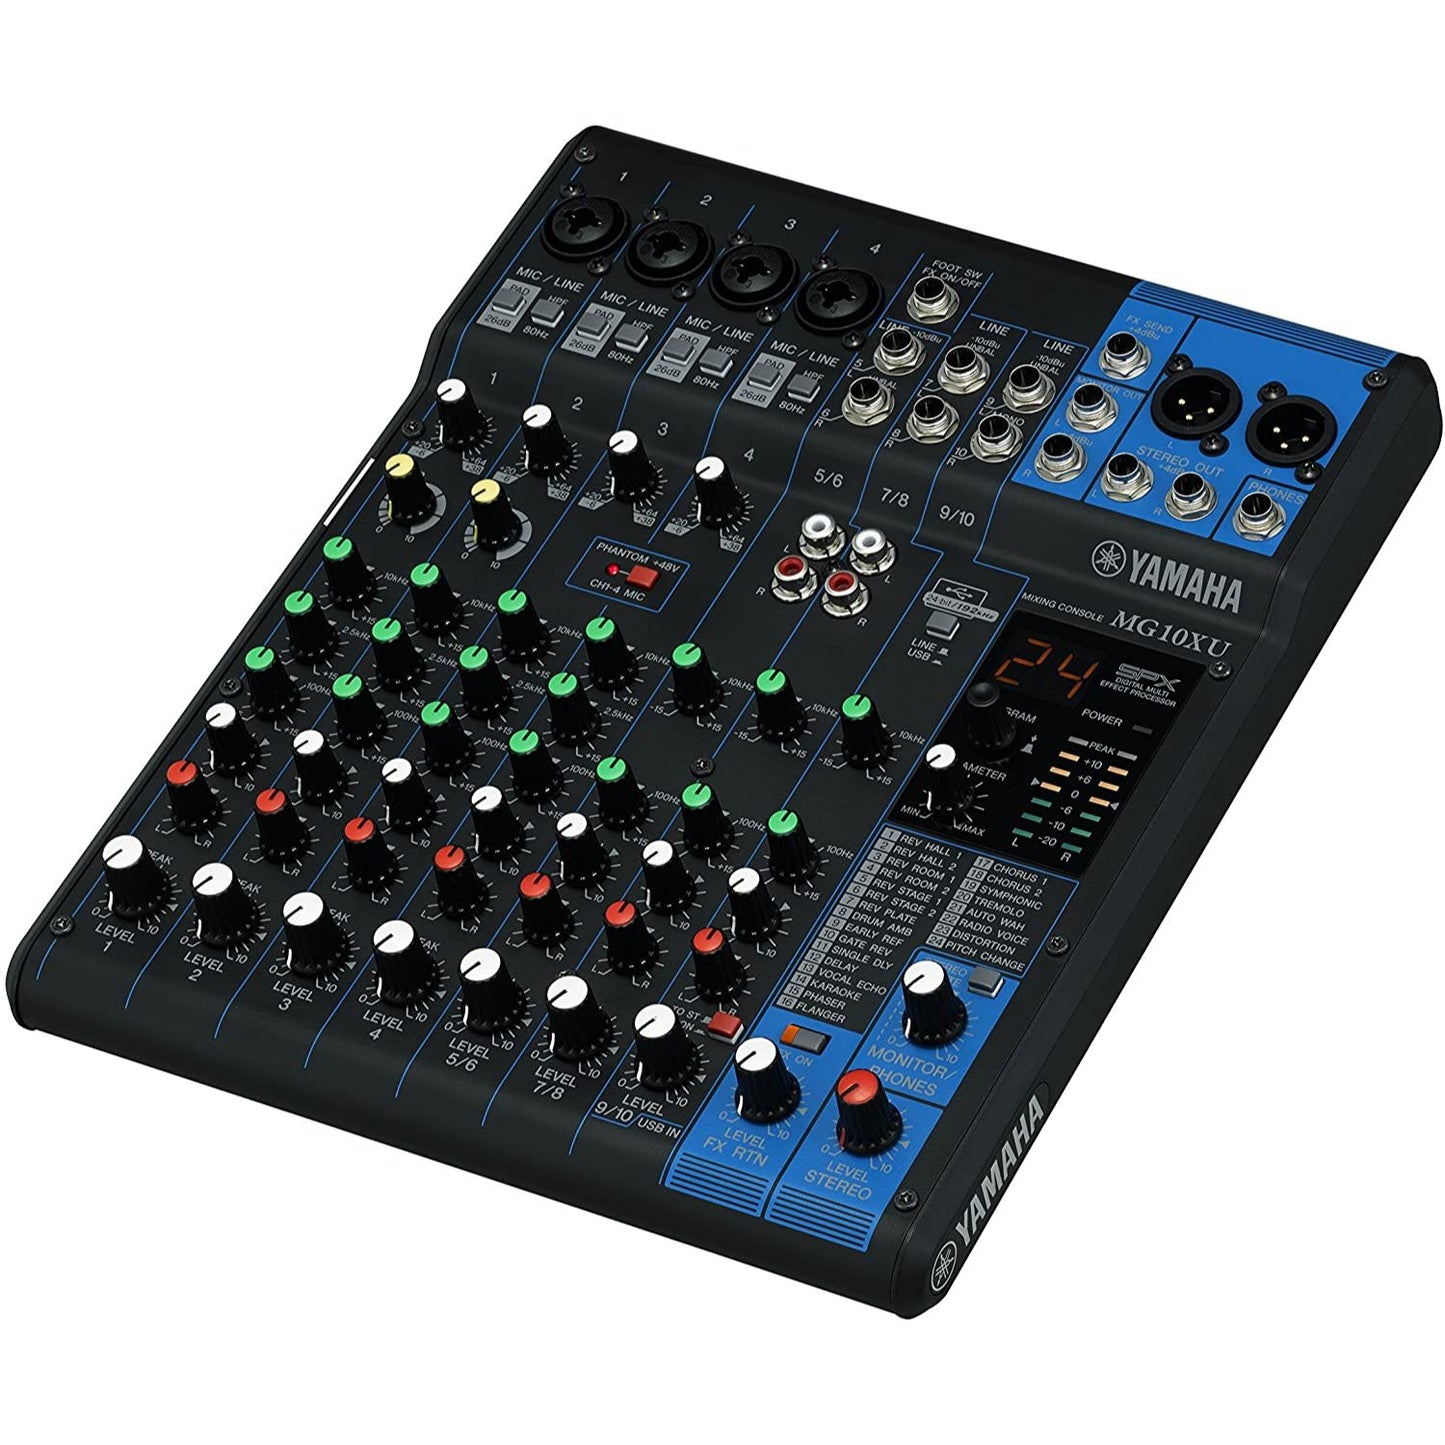 Yamaha MG10XU Mixer with effects and USB